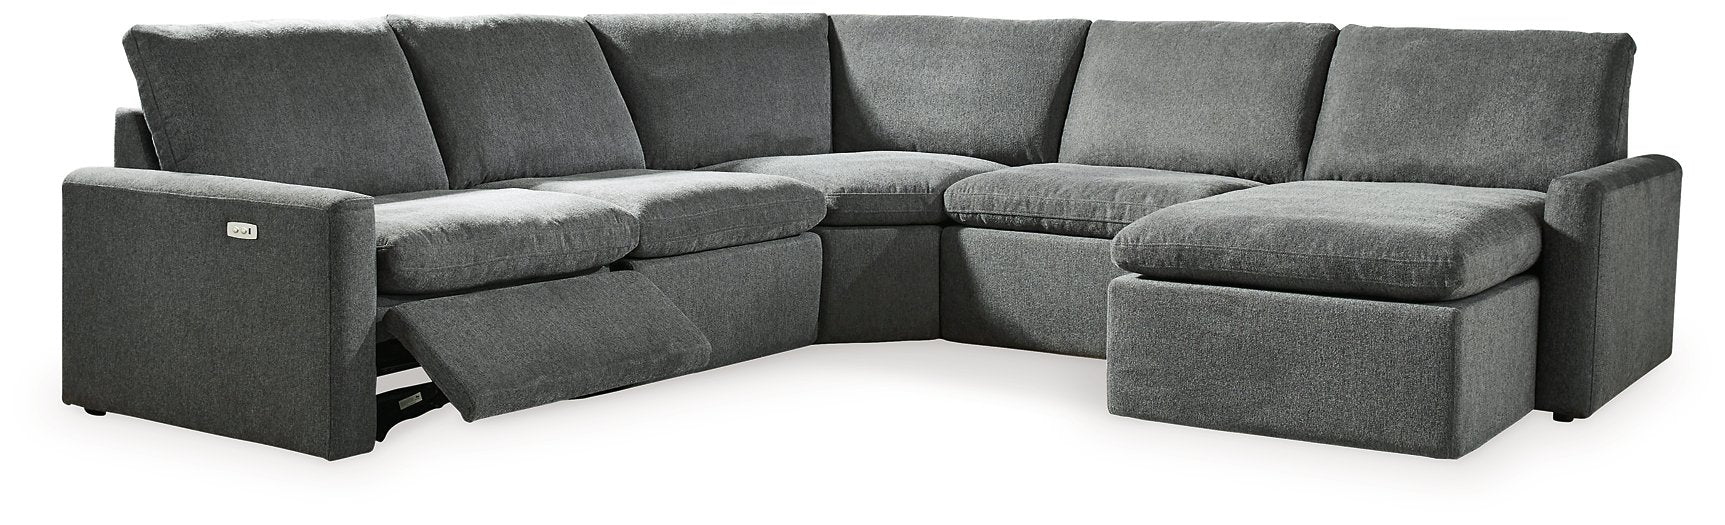 Hartsdale Power Reclining Sectional with Chaise image